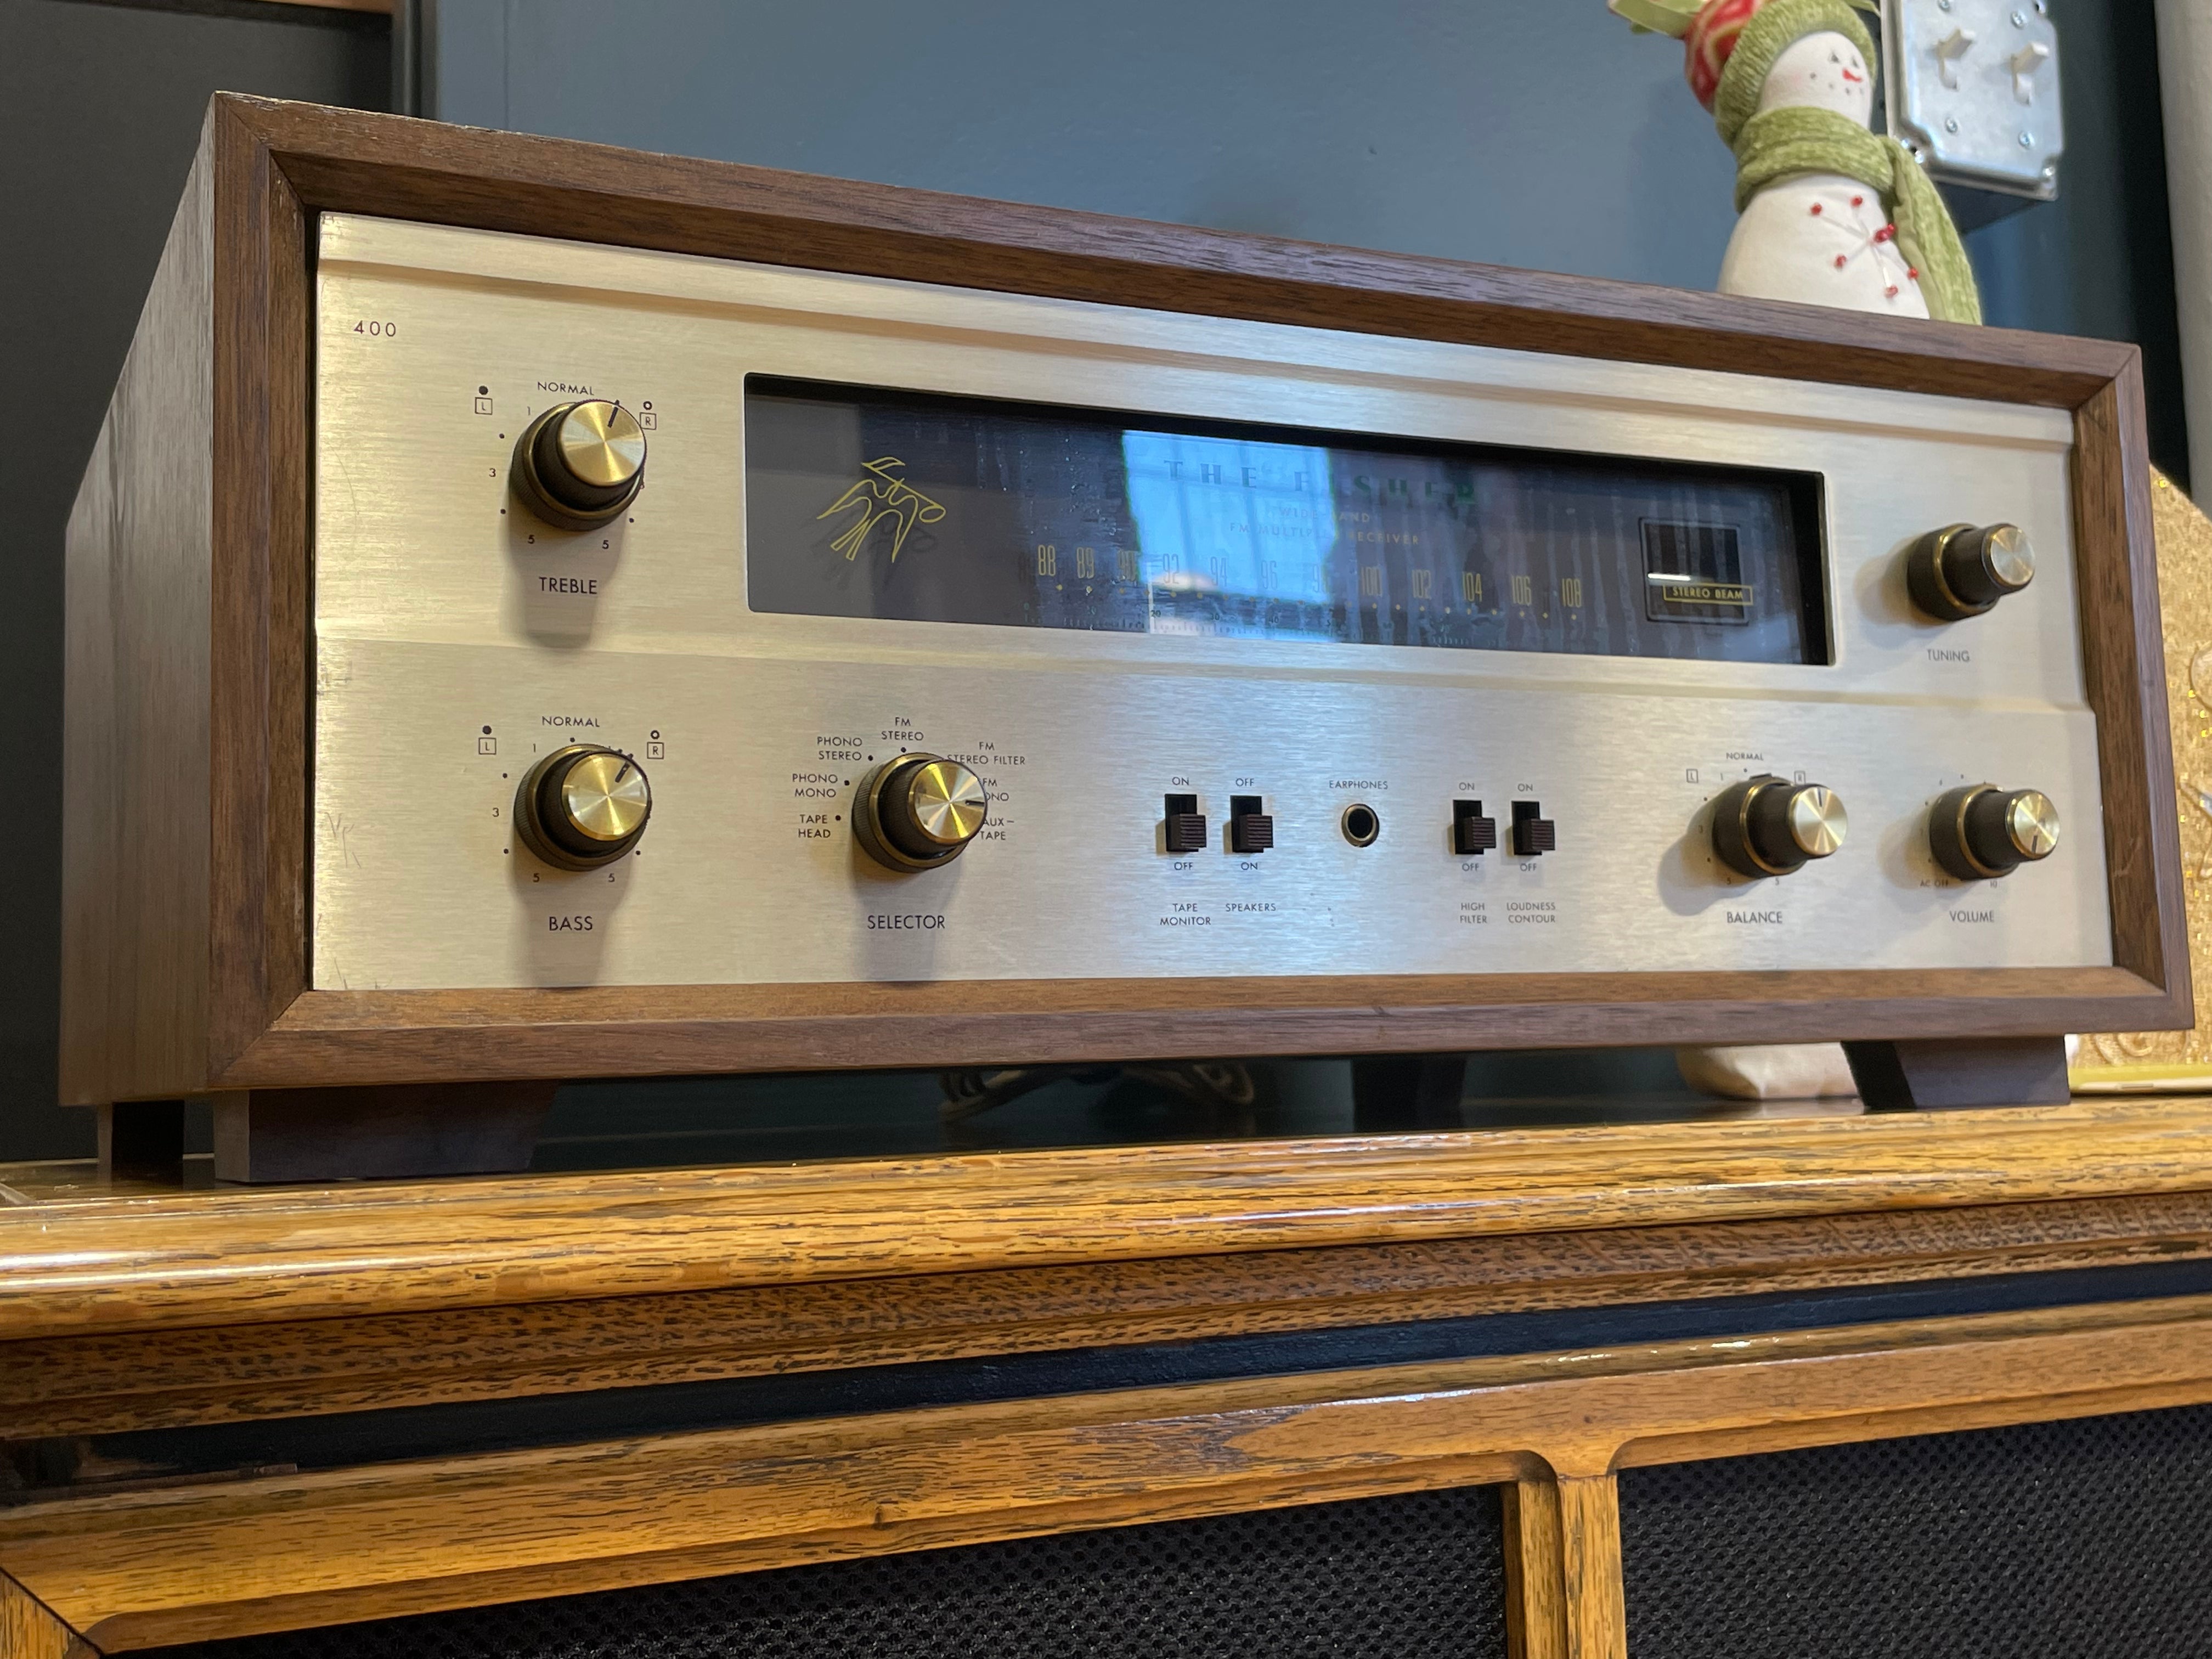 Fisher 400 Tube Receiver "Vintage Beauty" - SOLD